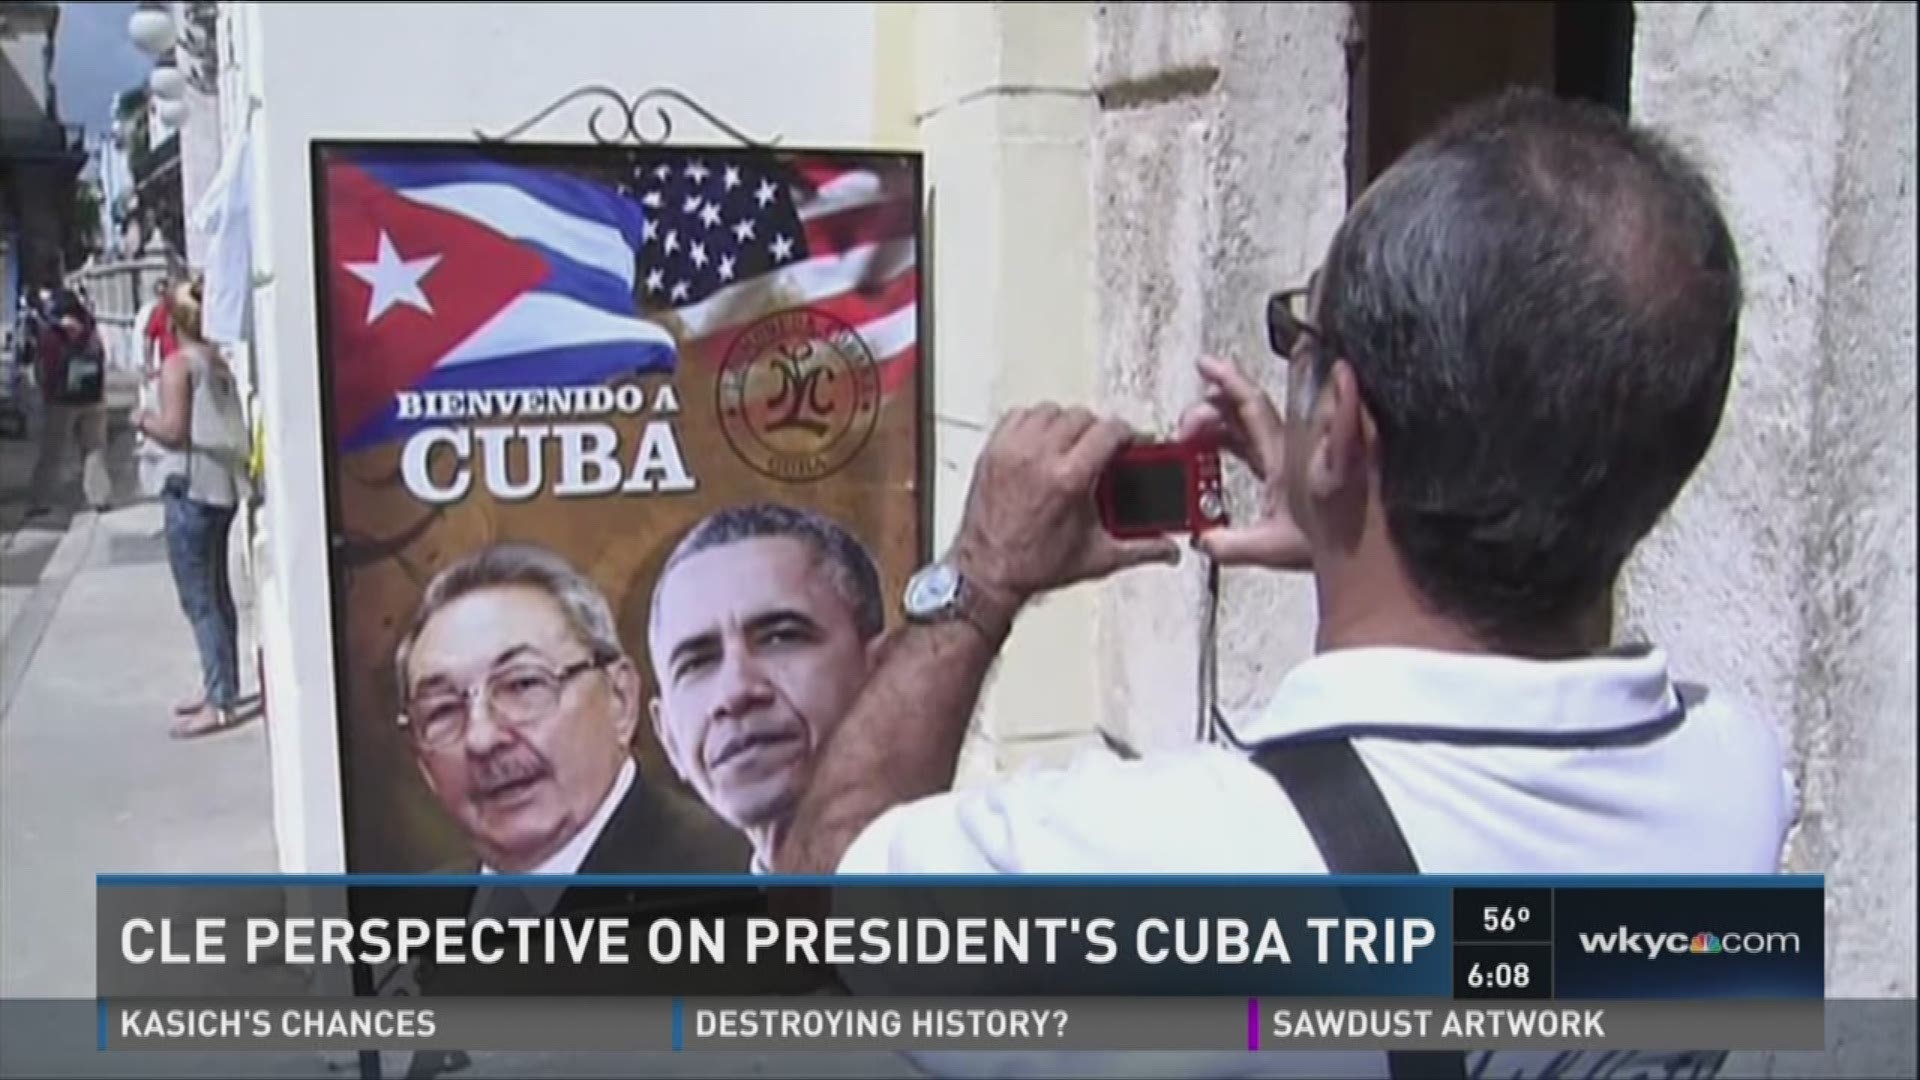 CLE perspective on President's Cuba trip